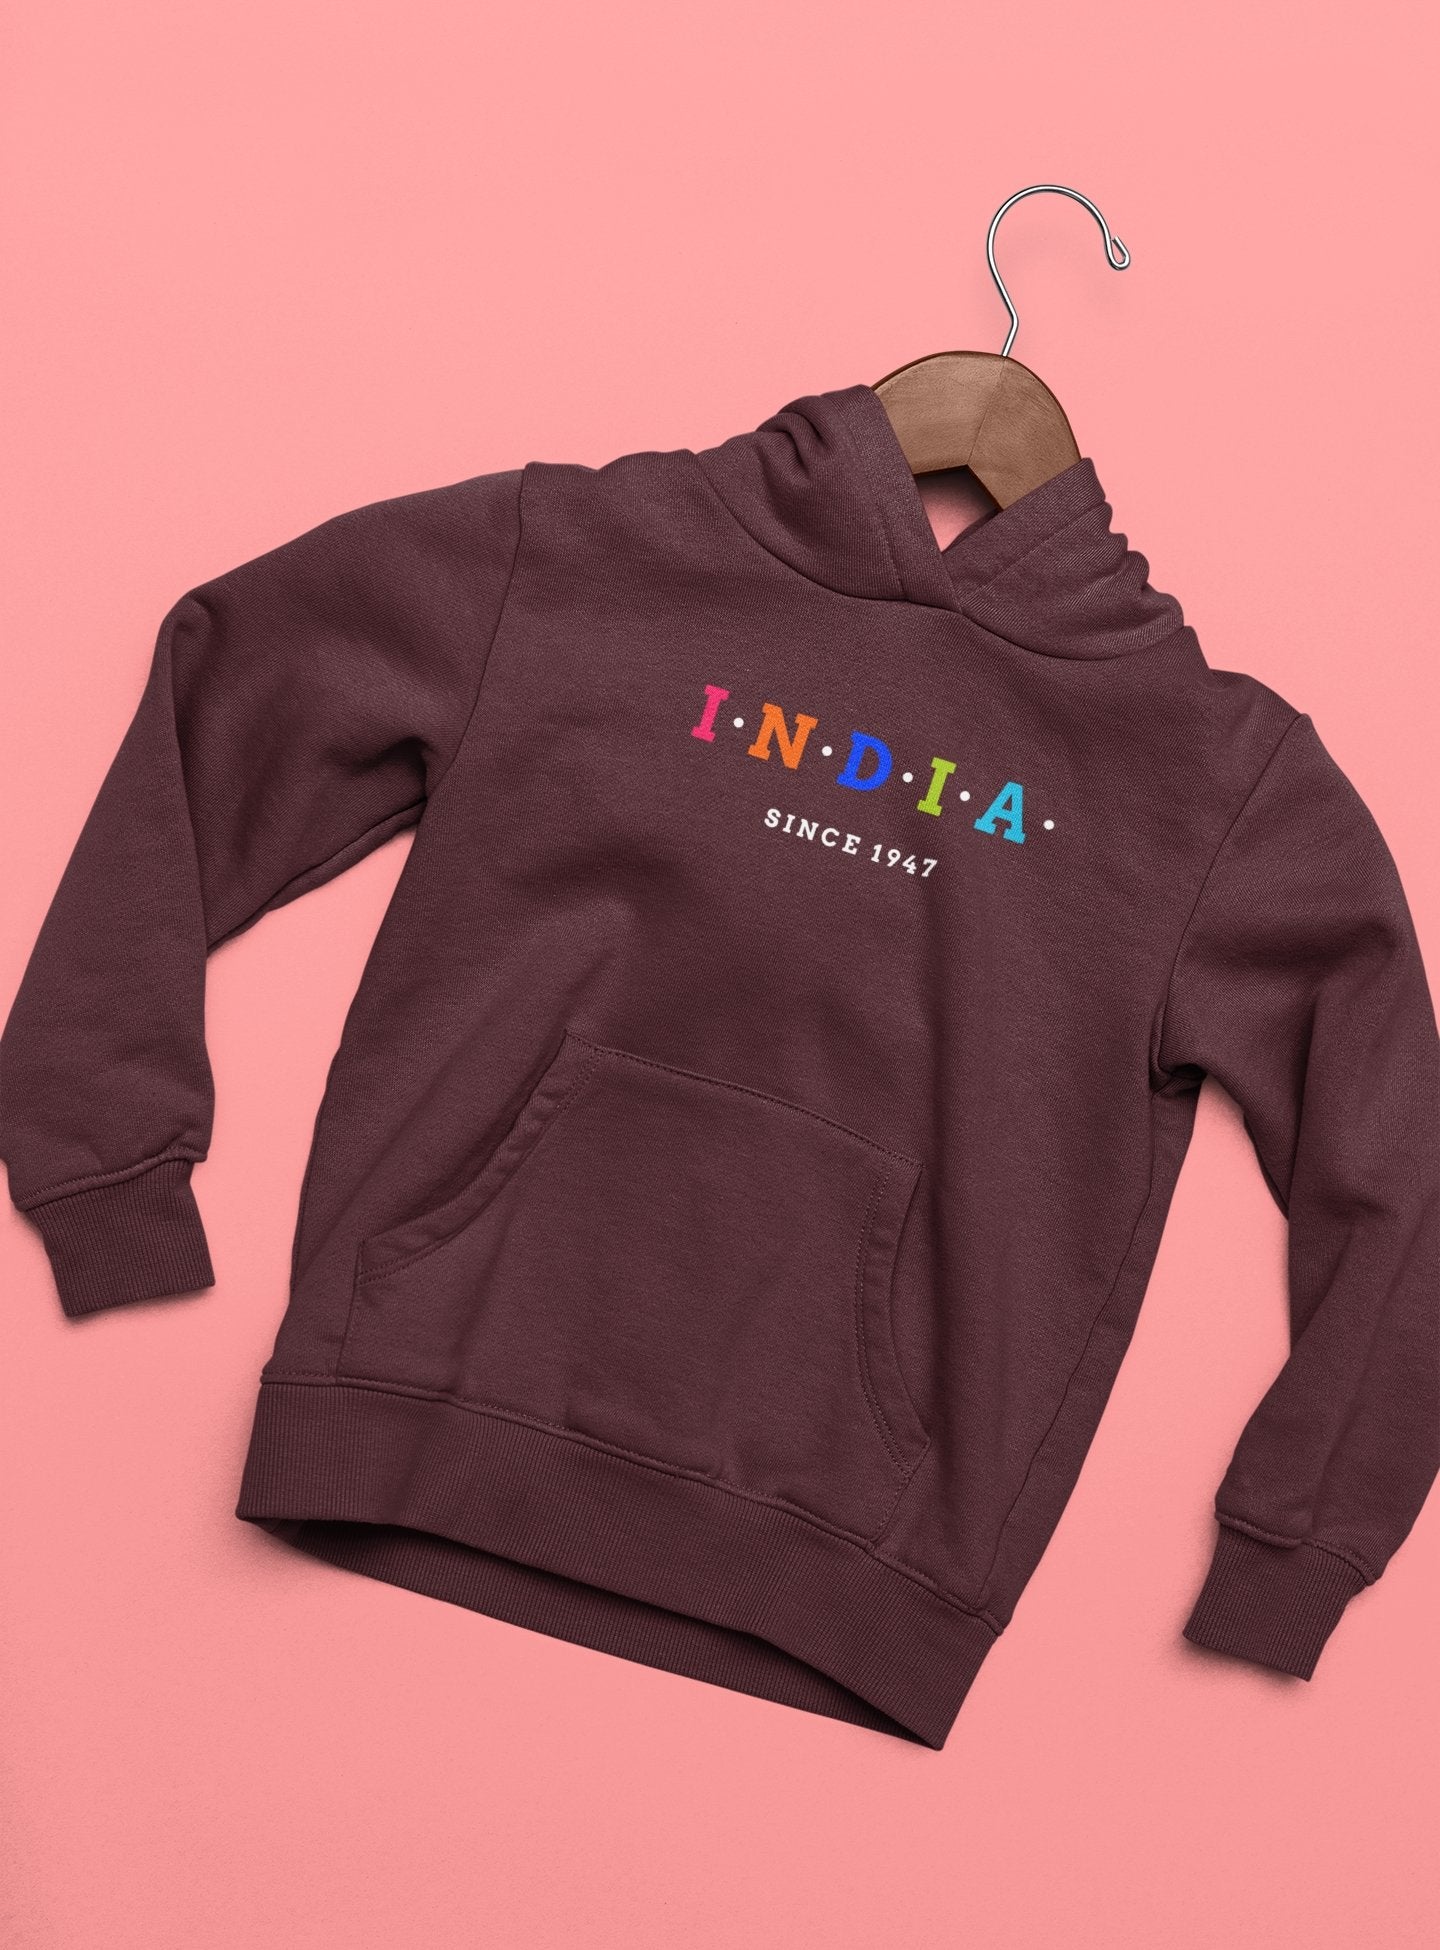 India Since 1947 Typography Men Hoodies-FunkyTradition - Funky Tees Club